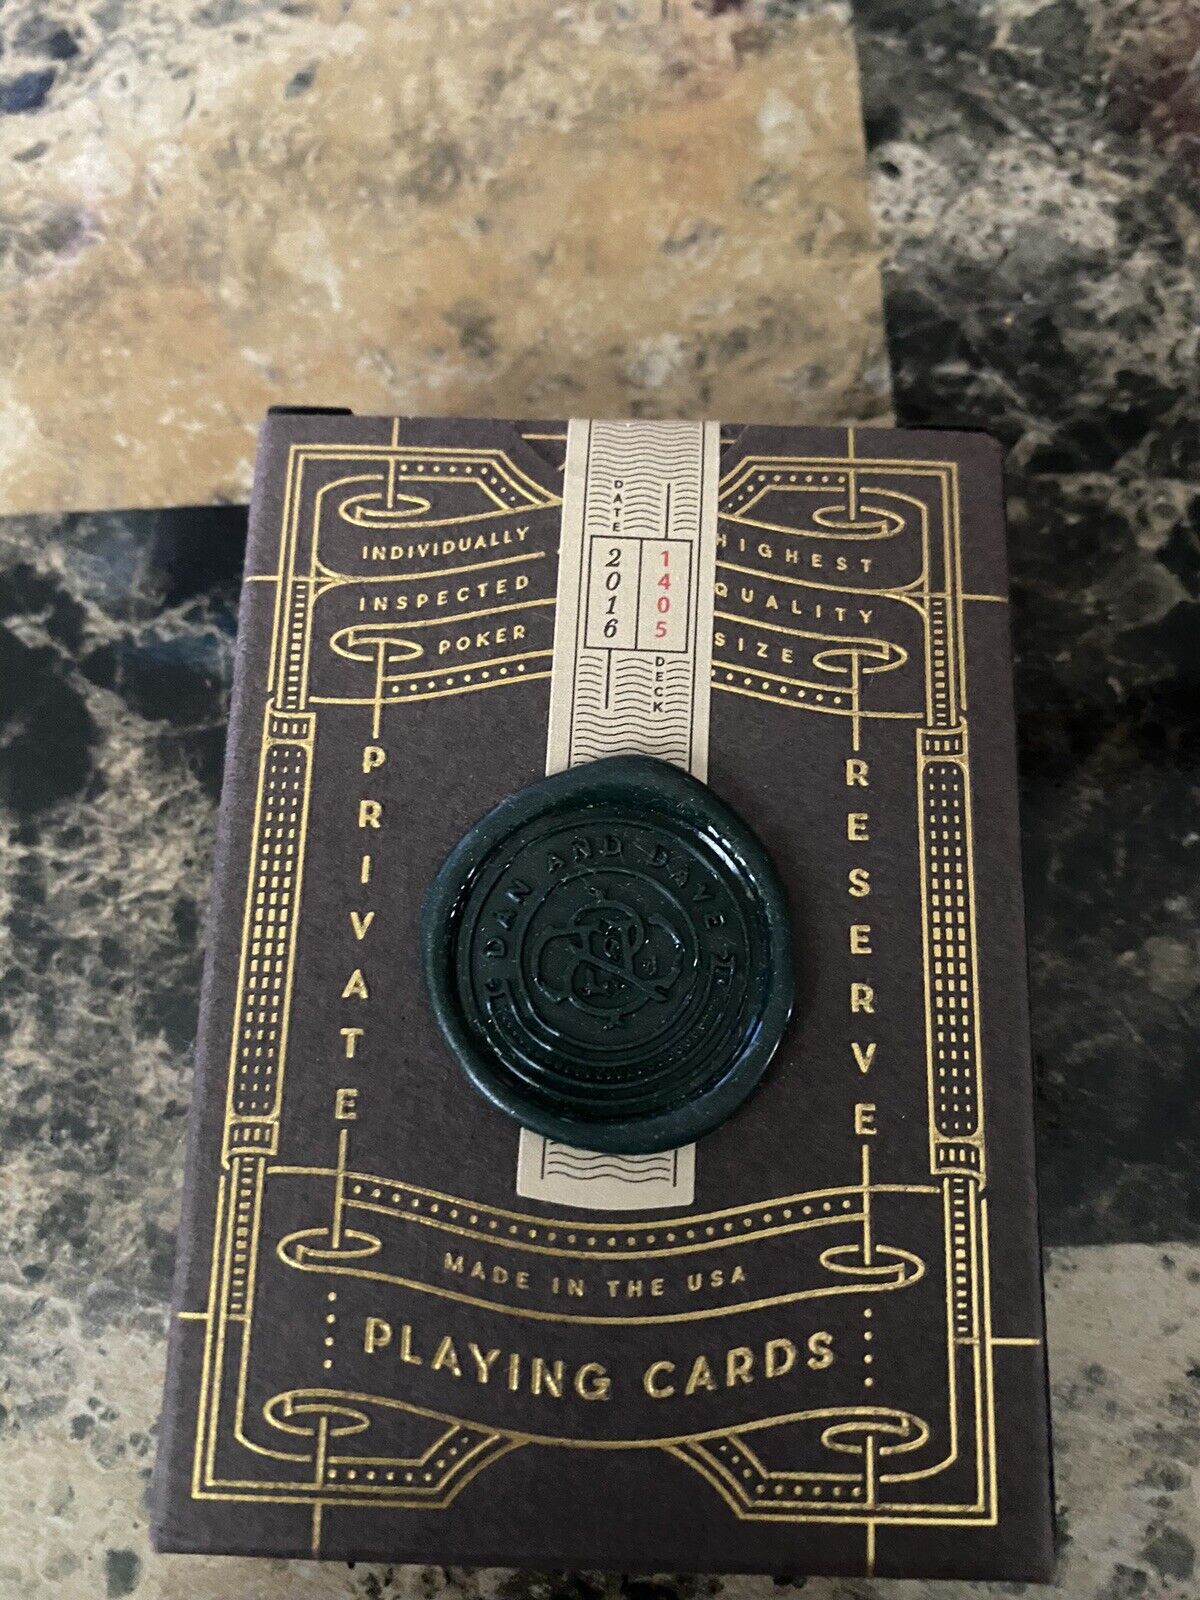 Dan And Dave Private Reserve Playing Cards New w/ wax seal 